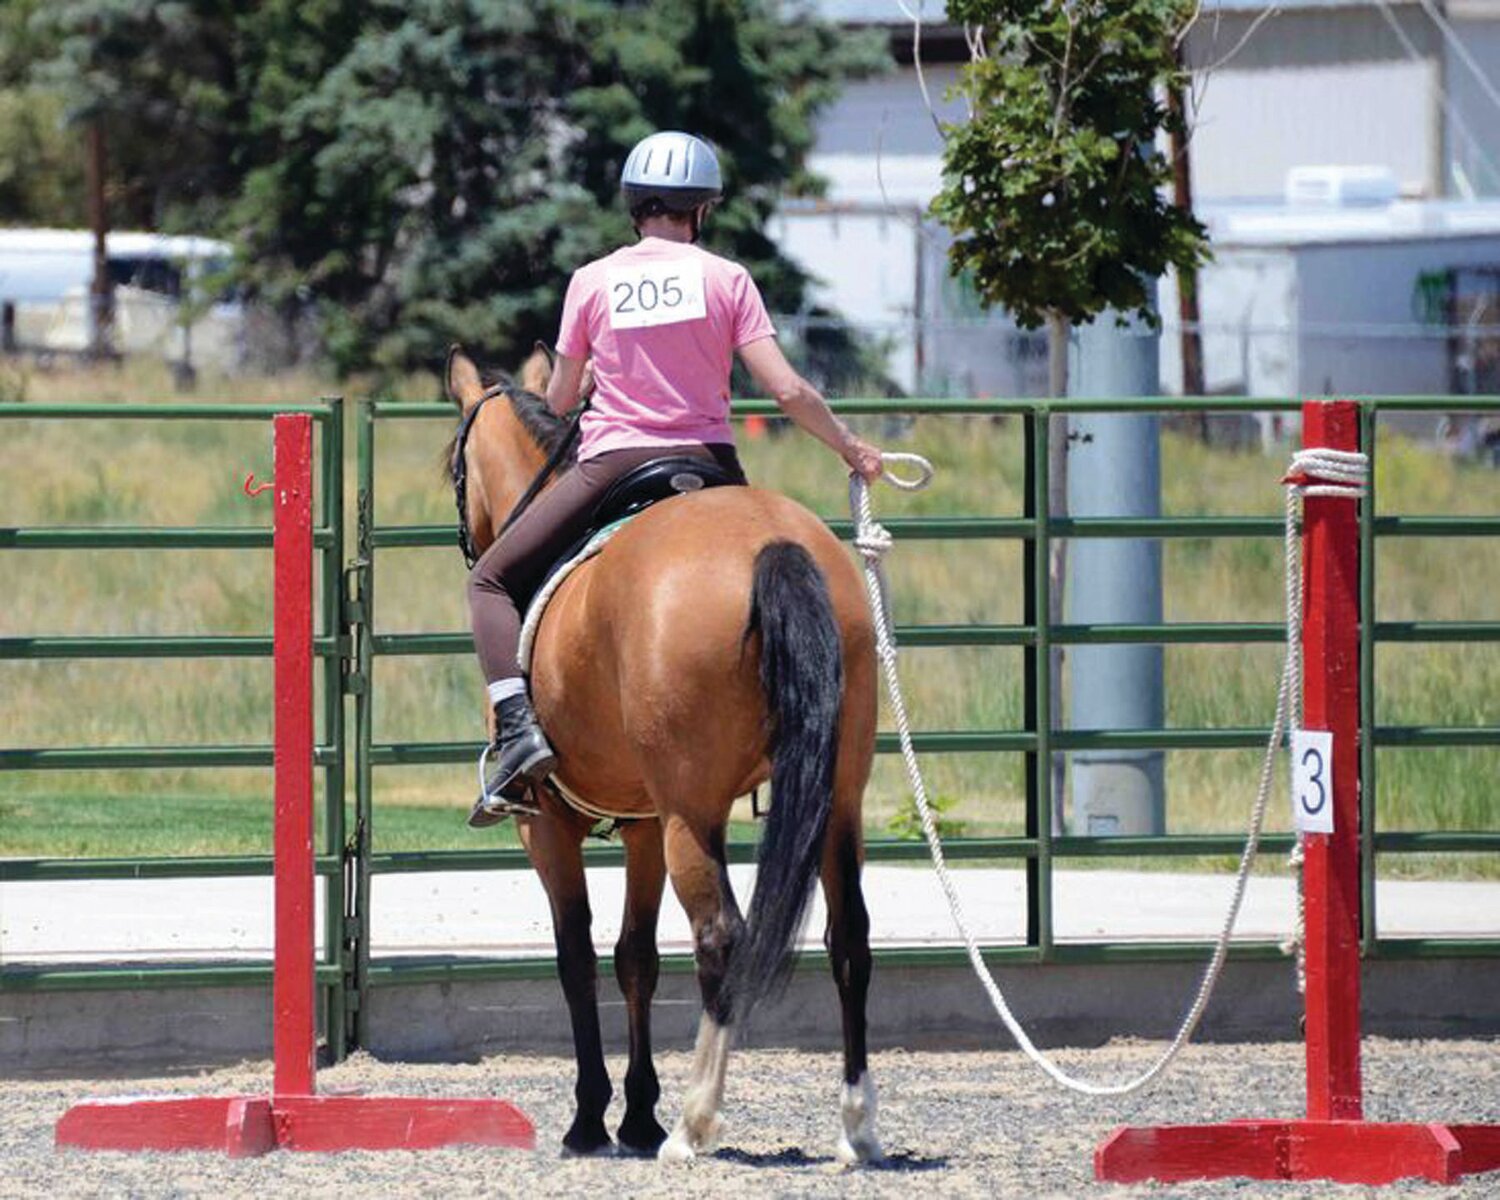 An equestrian demonstrates some of the skills that riders will work on during a two-day clinic in Working Equitation this month at the Bucks County Horse Park.